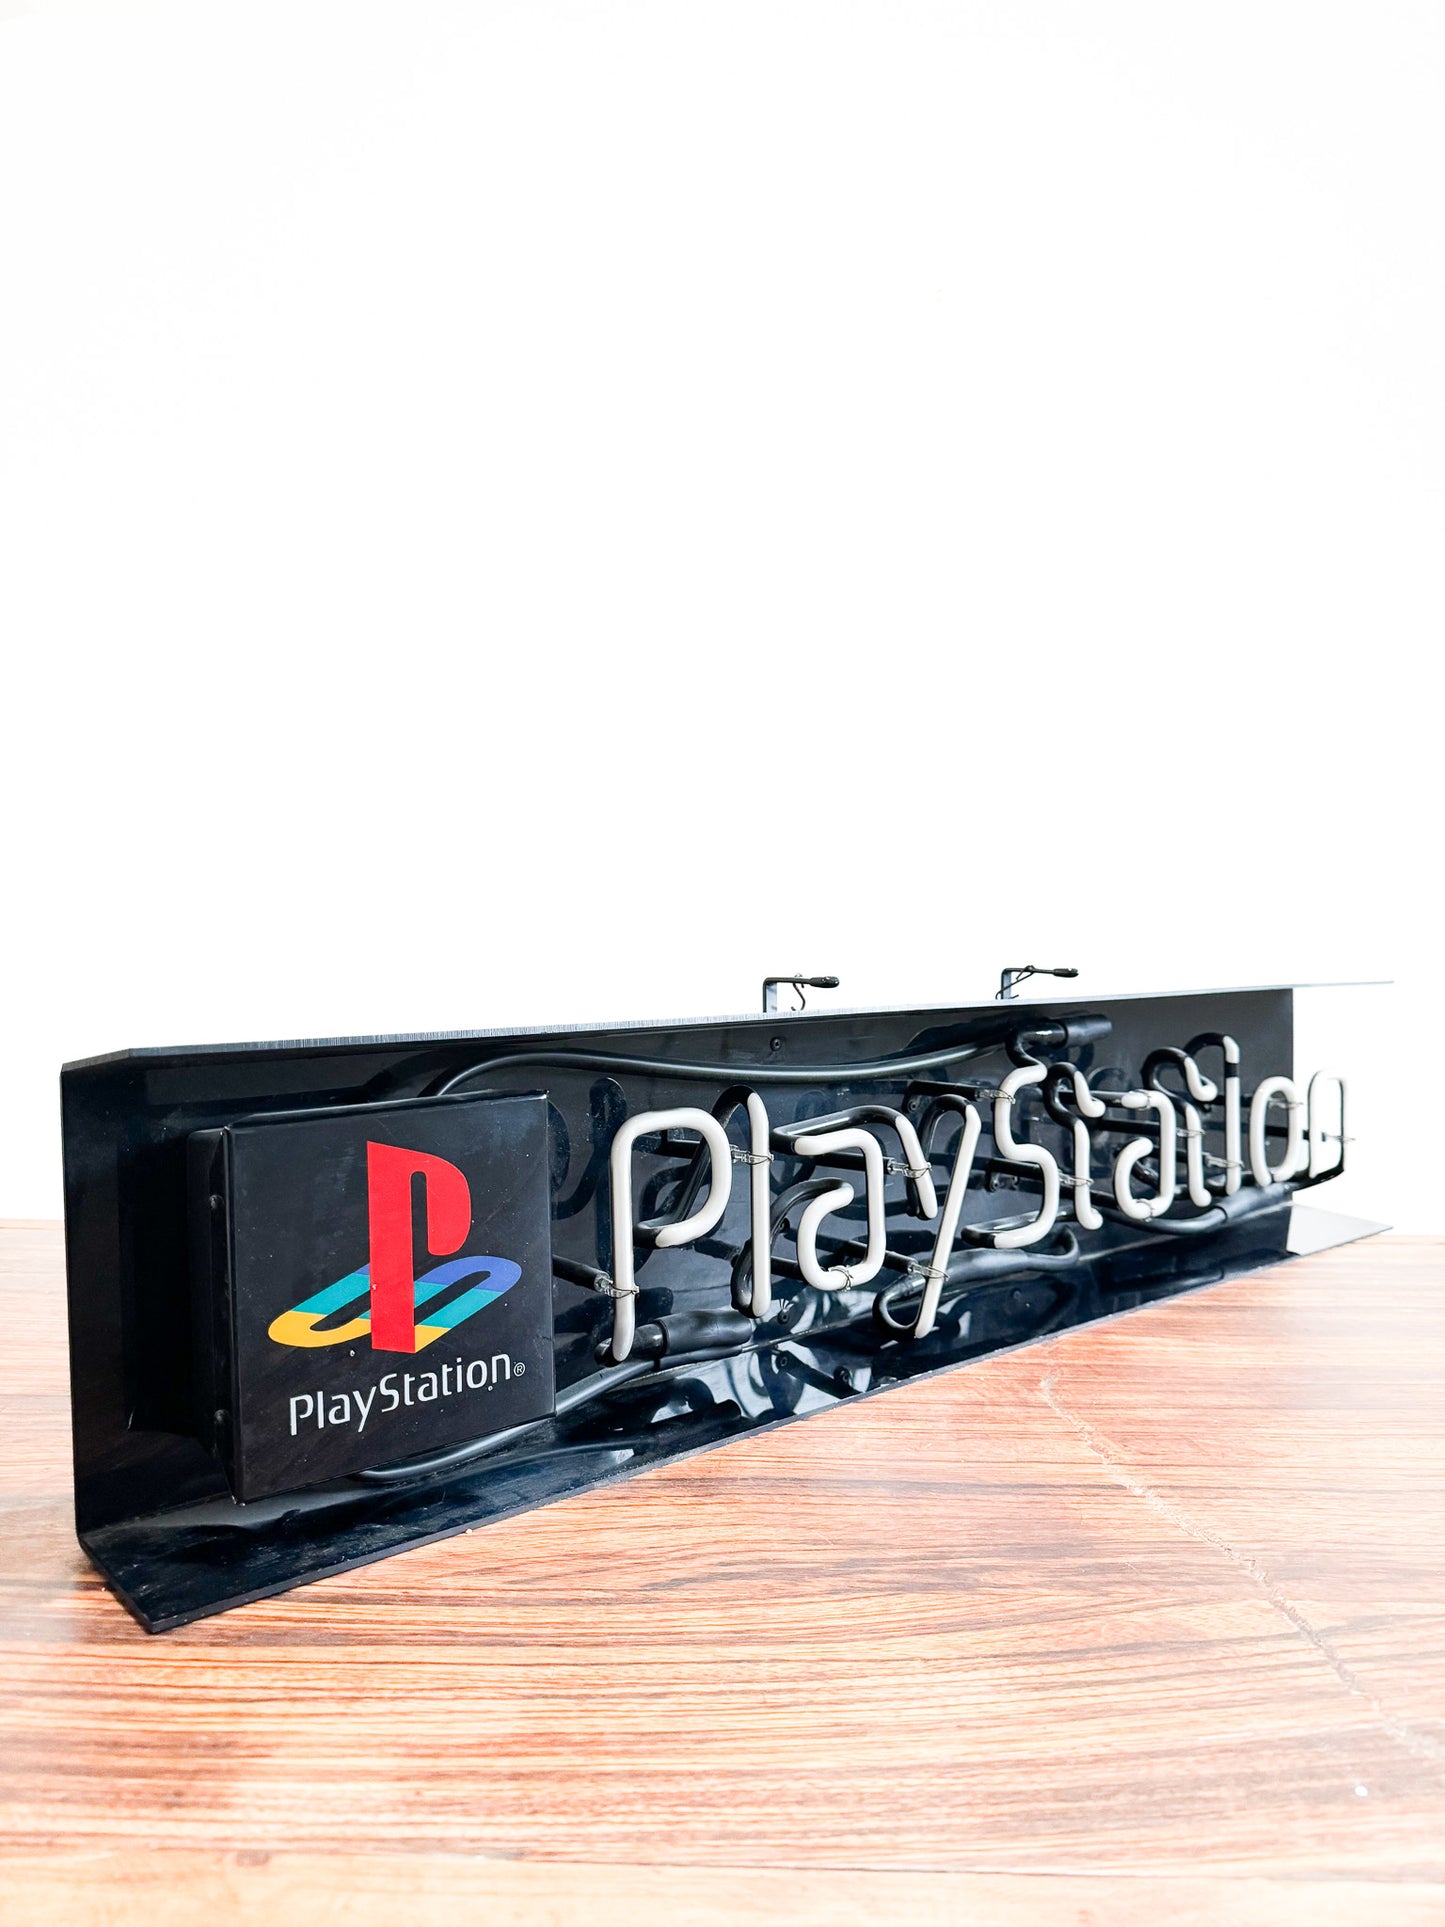 PlayStation Neon Sign Fully Working